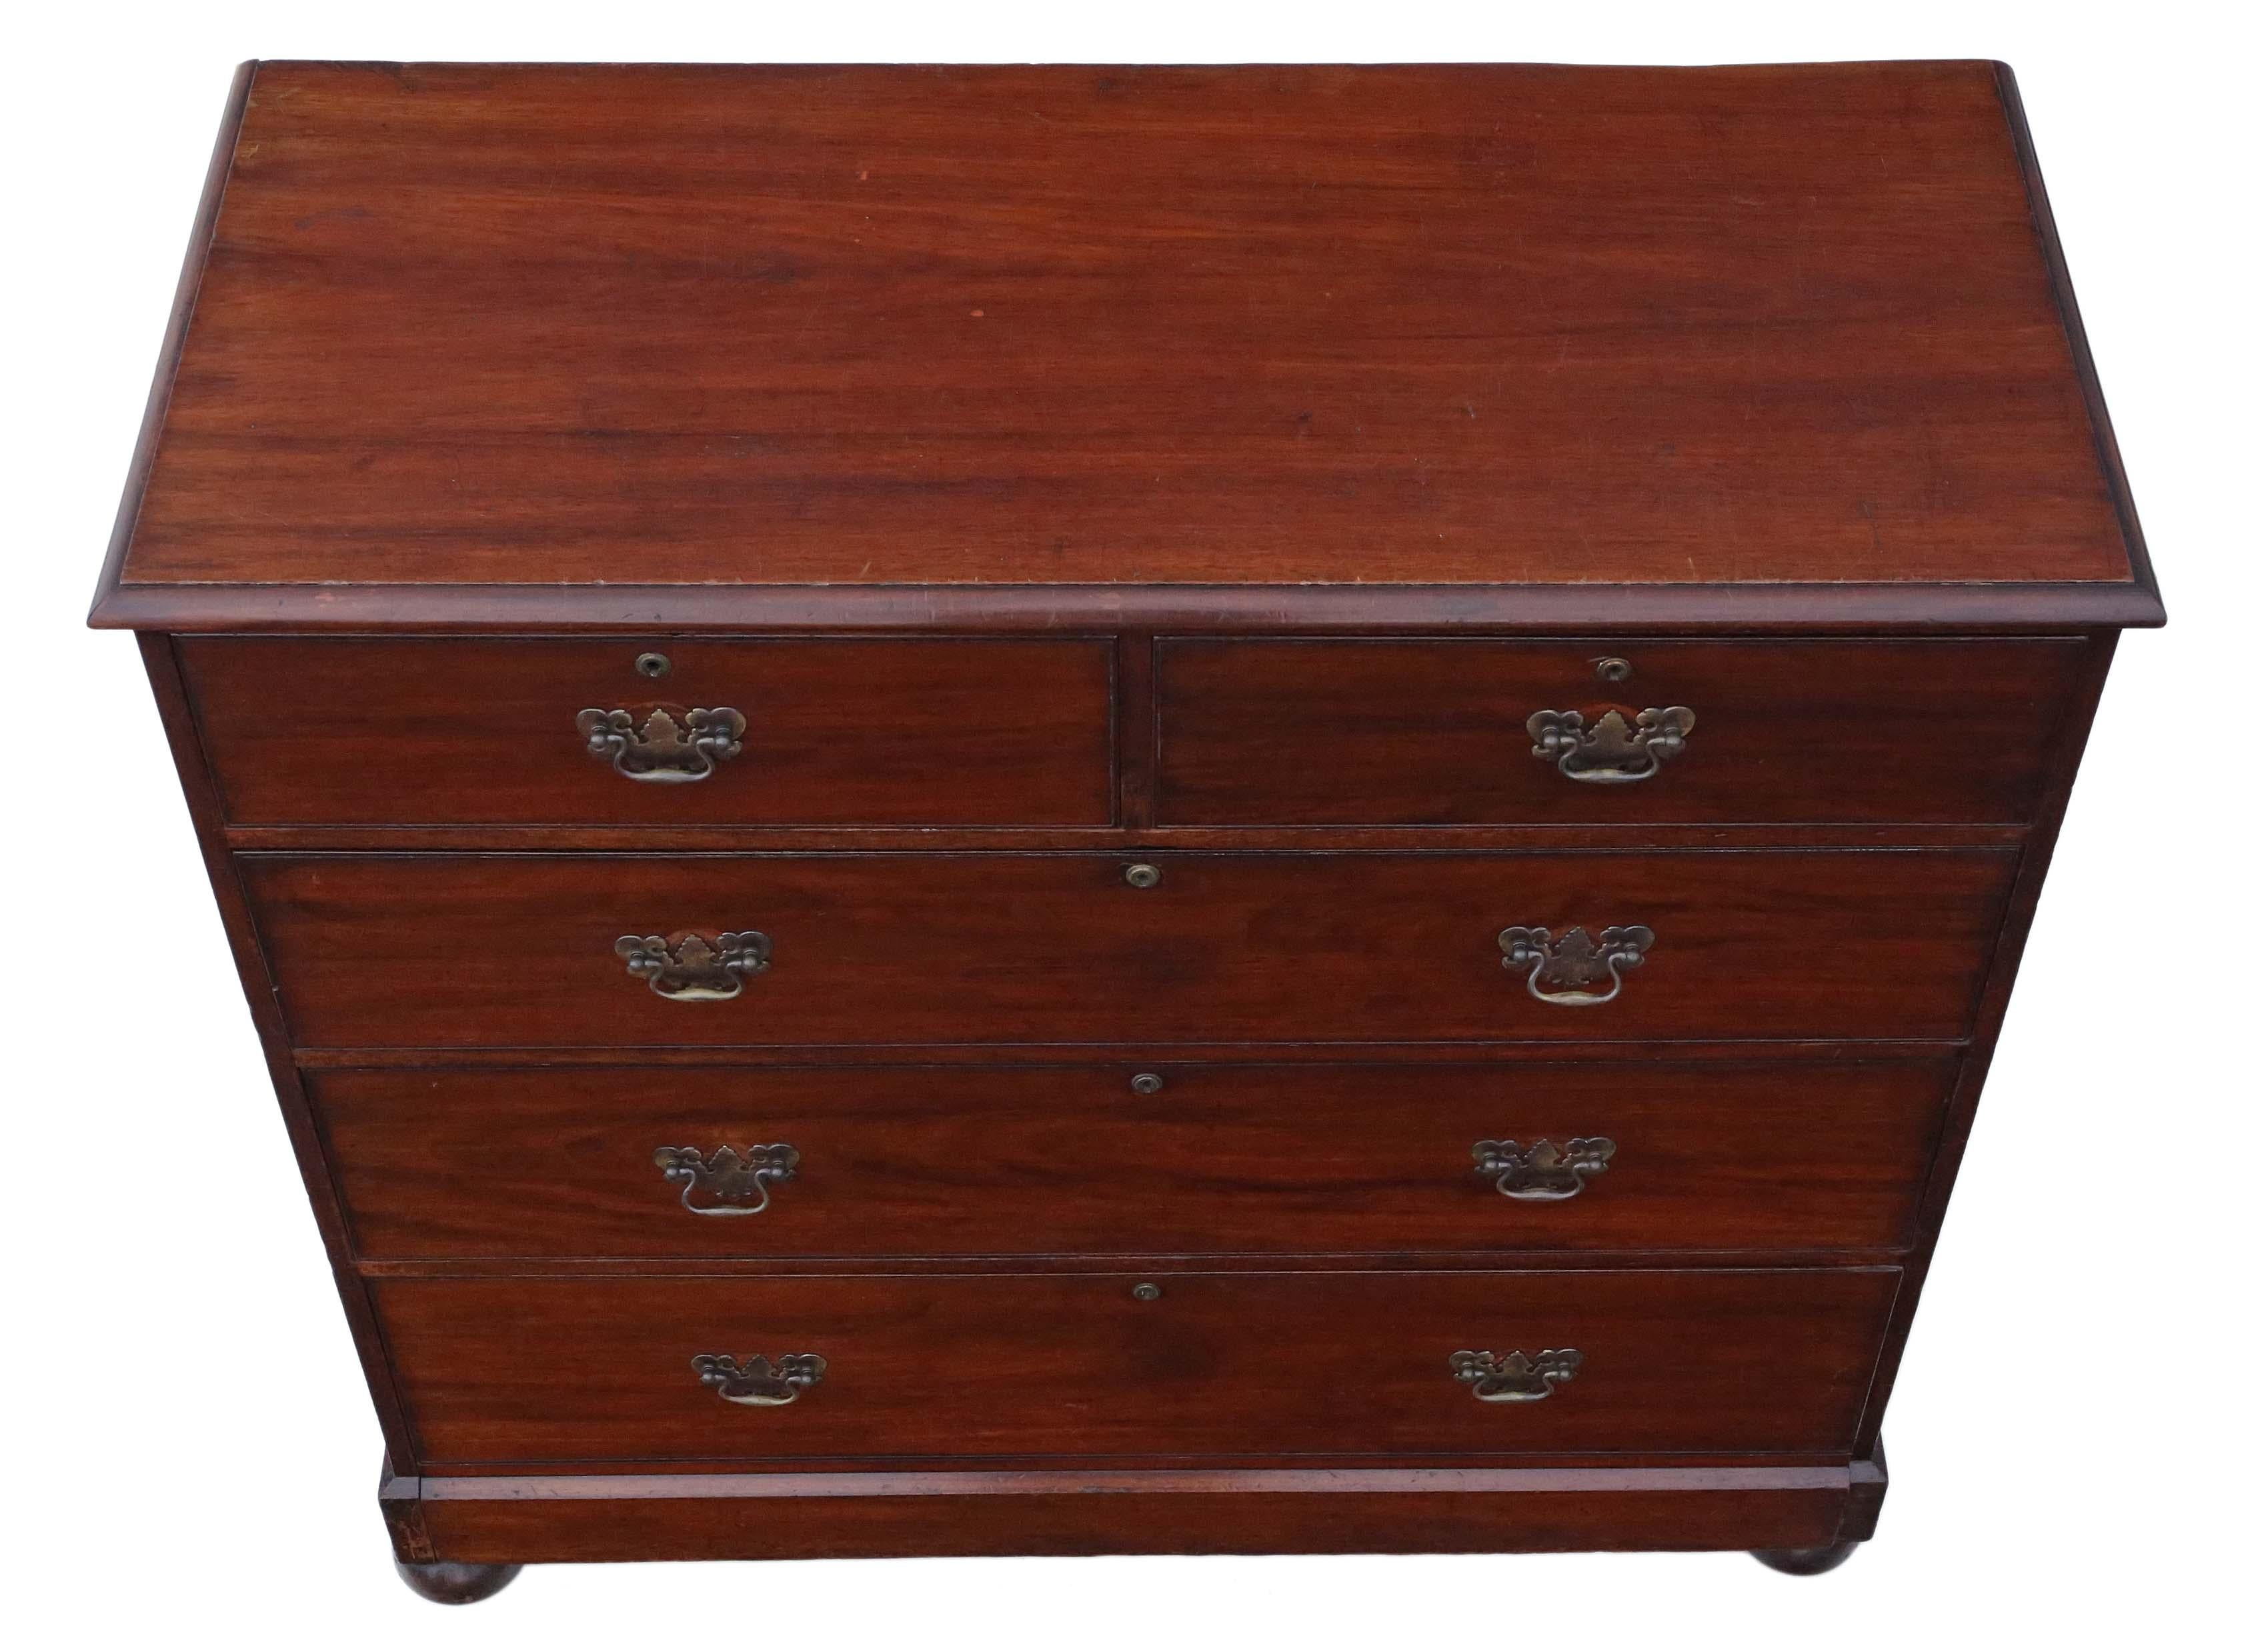 Antique large quality Victorian 19th century mahogany chest of drawers.
A heavy quality chest, with no loose joints and the ash lined drawers slide freely.

No woodworm.

Full of age charm and character....would look great in the right